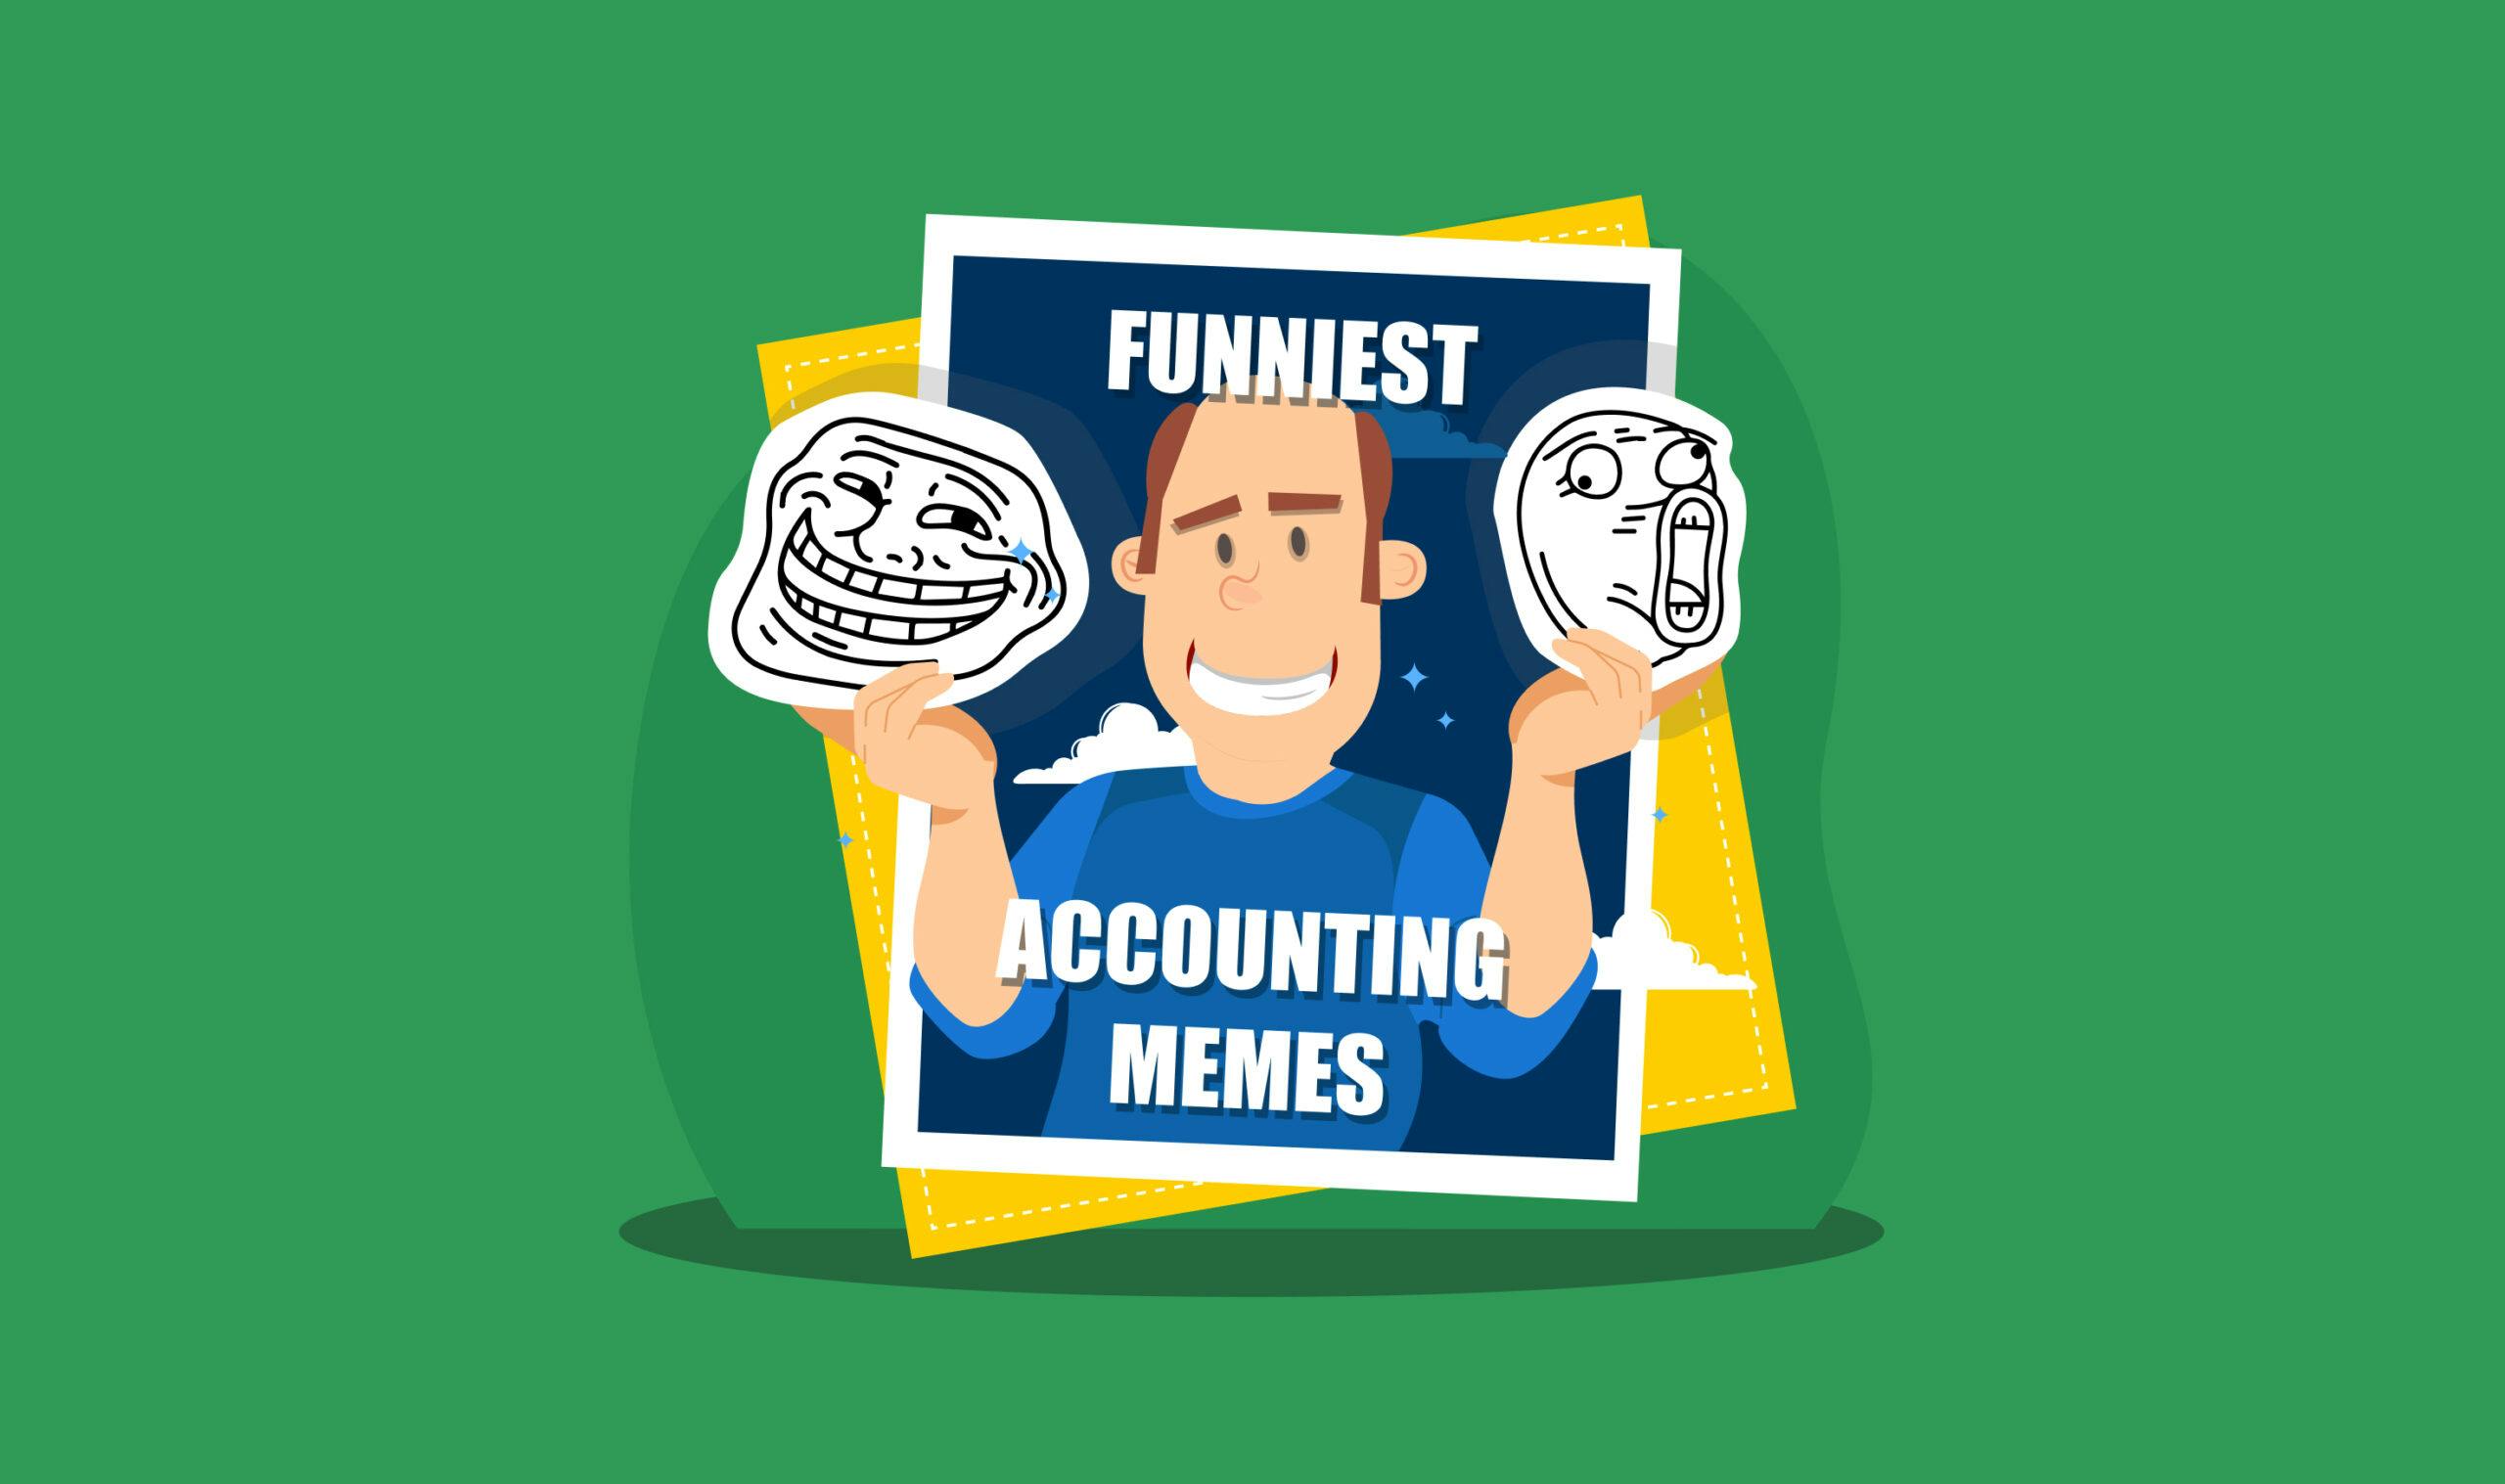 20 of the Funniest Accounting Memes to Bring Some Humor to Your Balance Sheet